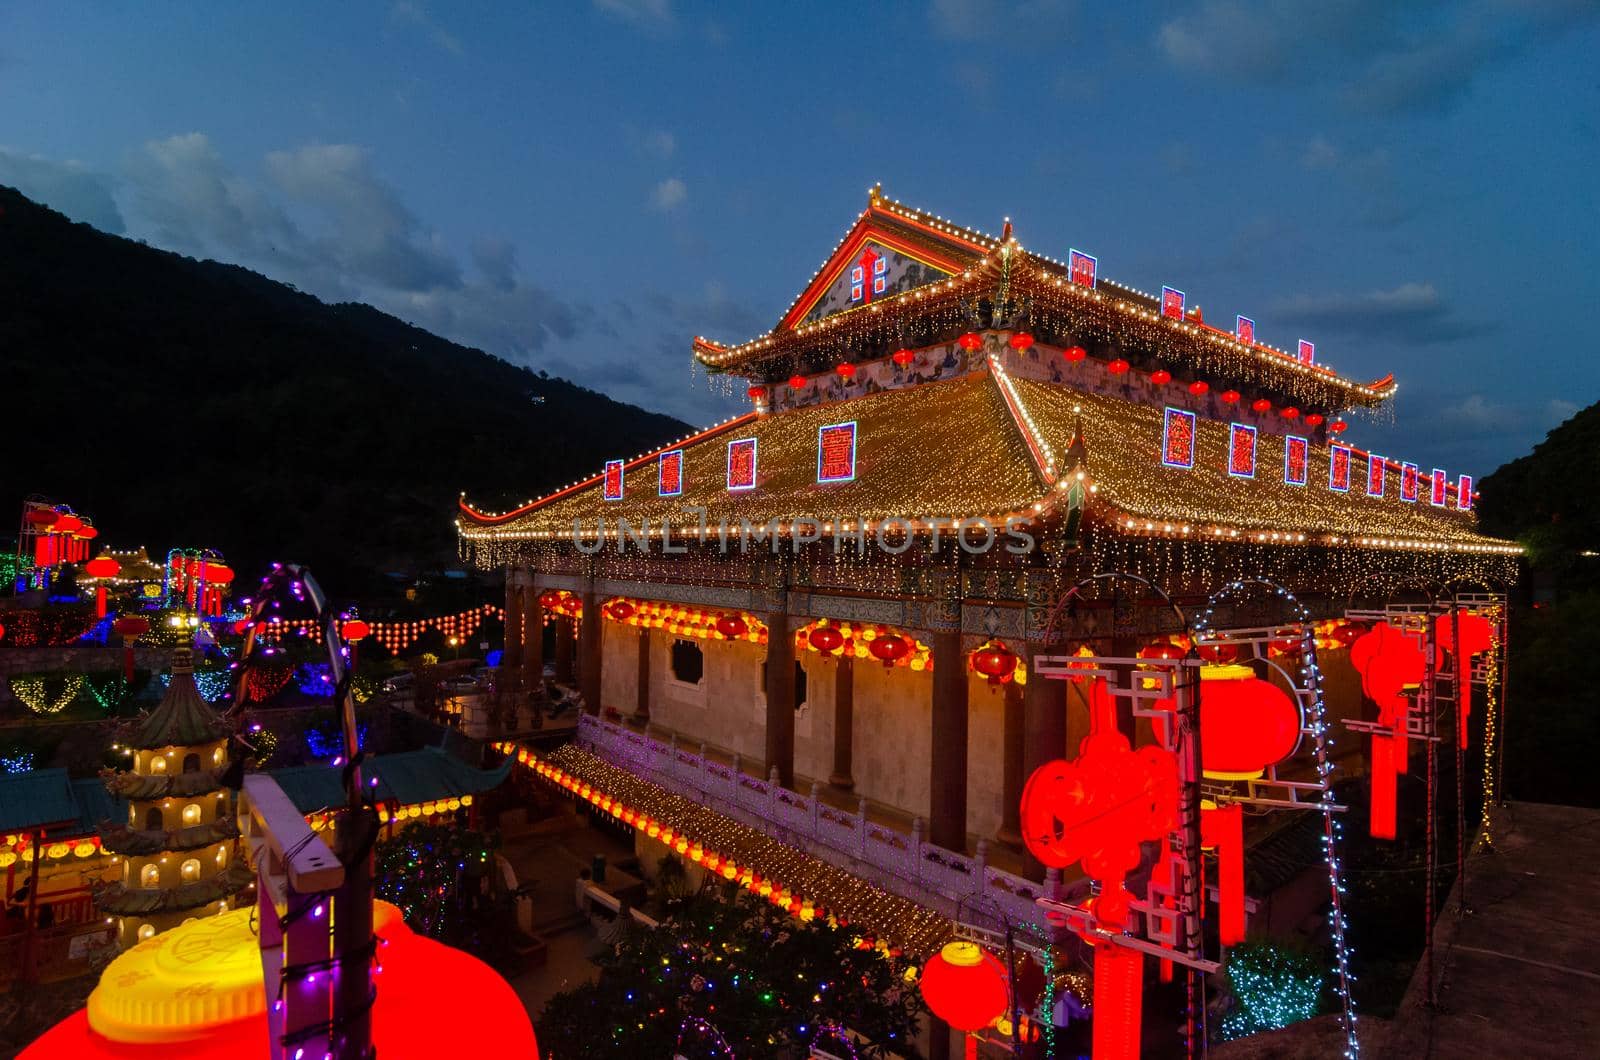 Georgetown, Penang/Malaysia - Feb 20 2020: Kek Lok Si temple with colorful light during blue hour.